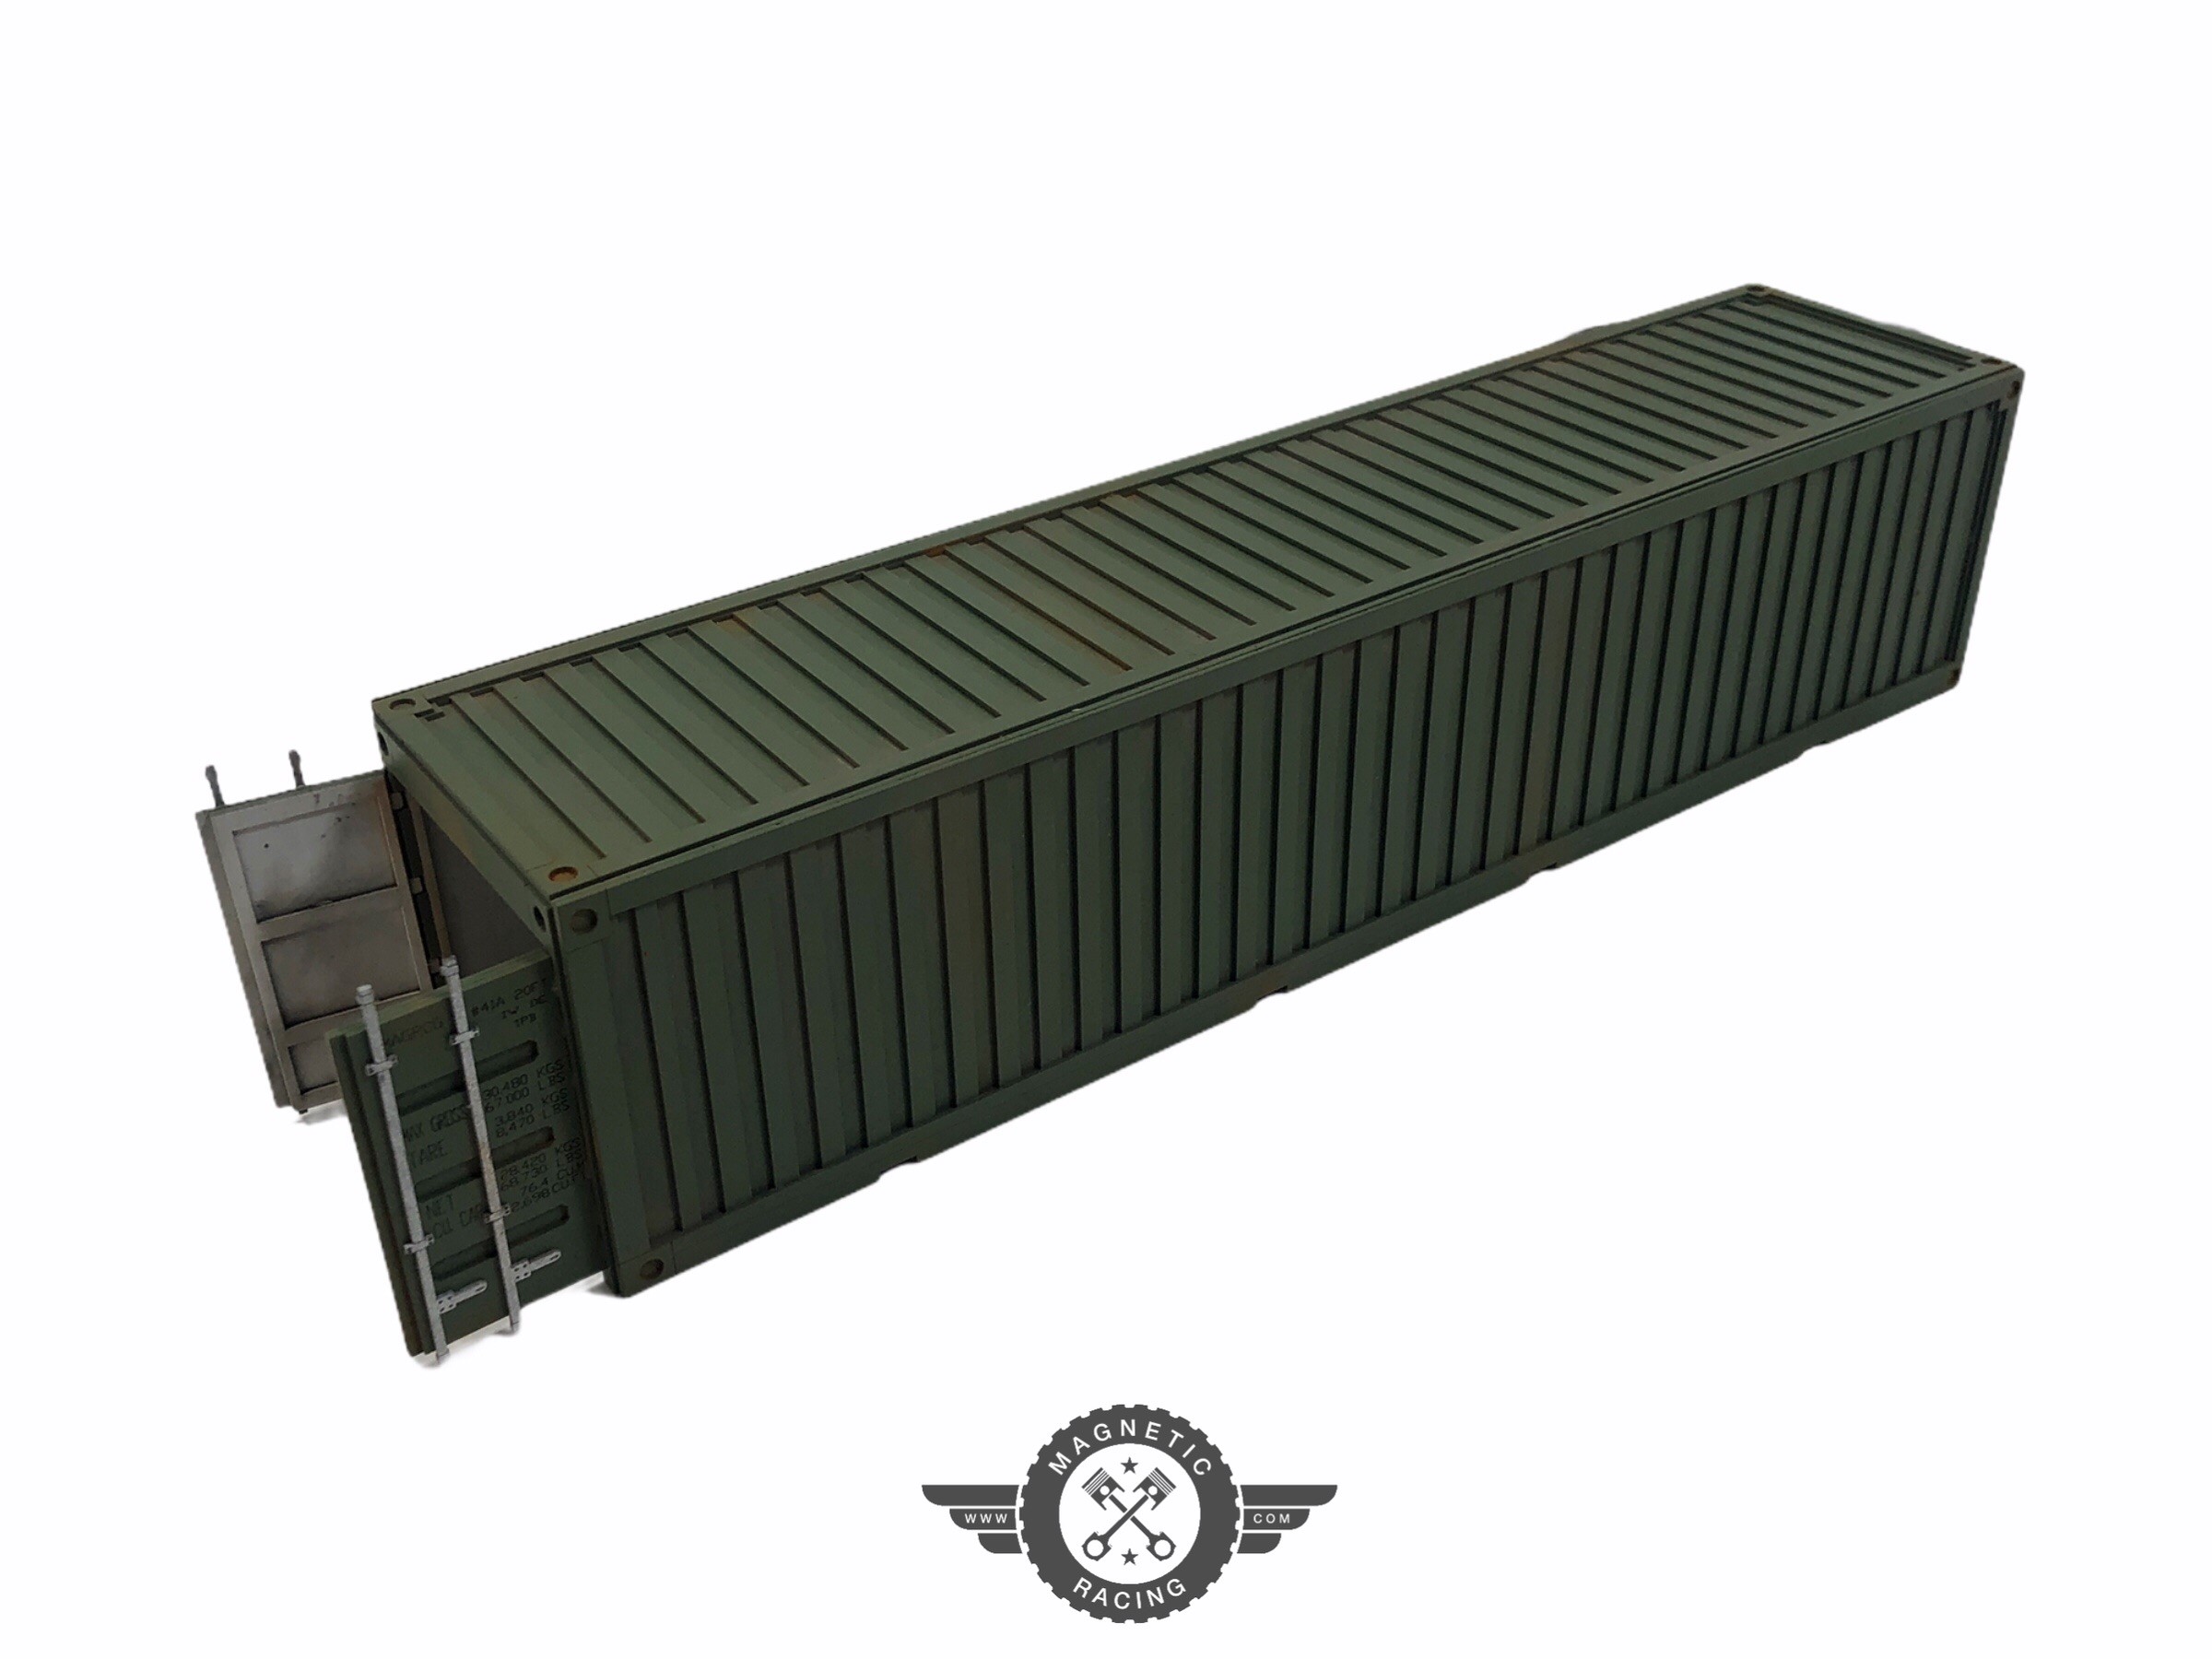 041L Large 40ft Container (Several Logo Options) (1:32, 40% OFF